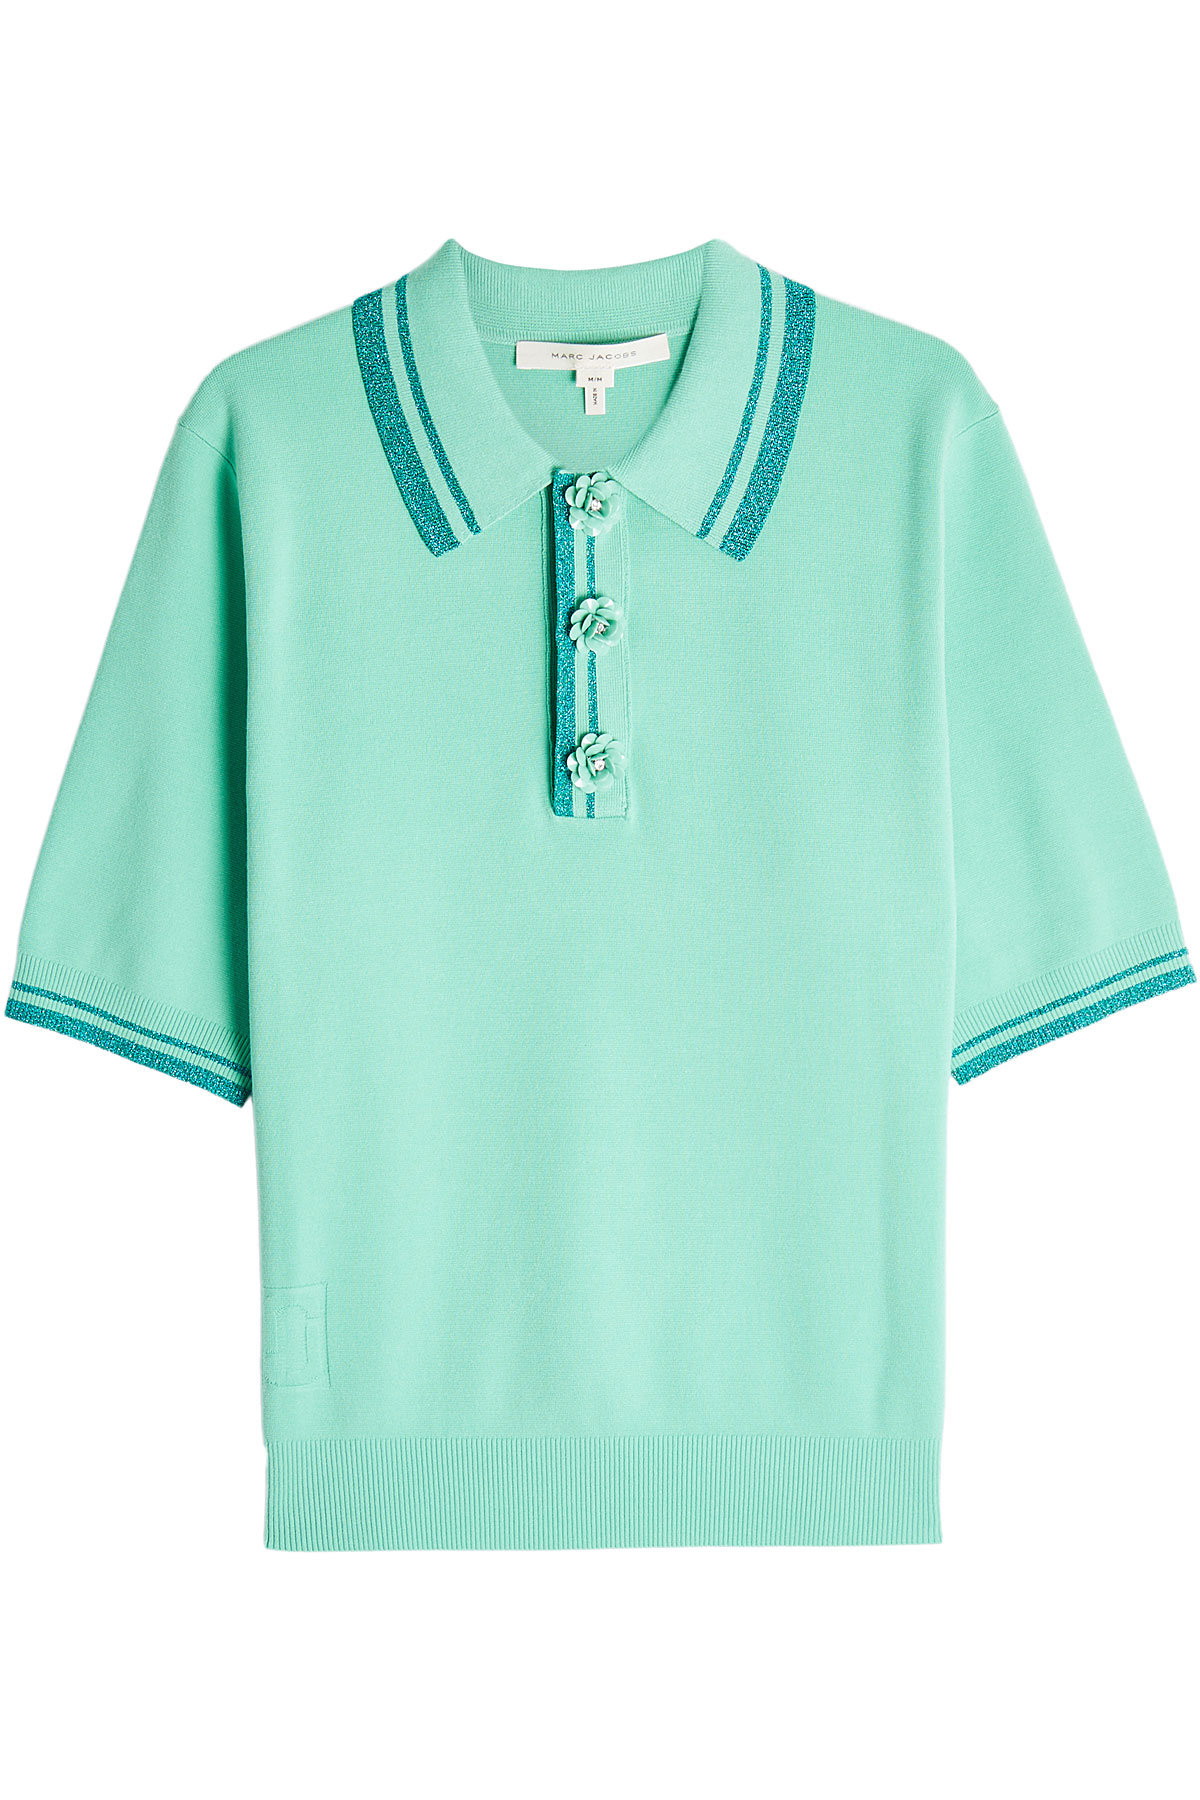 Knit Polo Shirt with Metallic Thread by Marc Jacobs